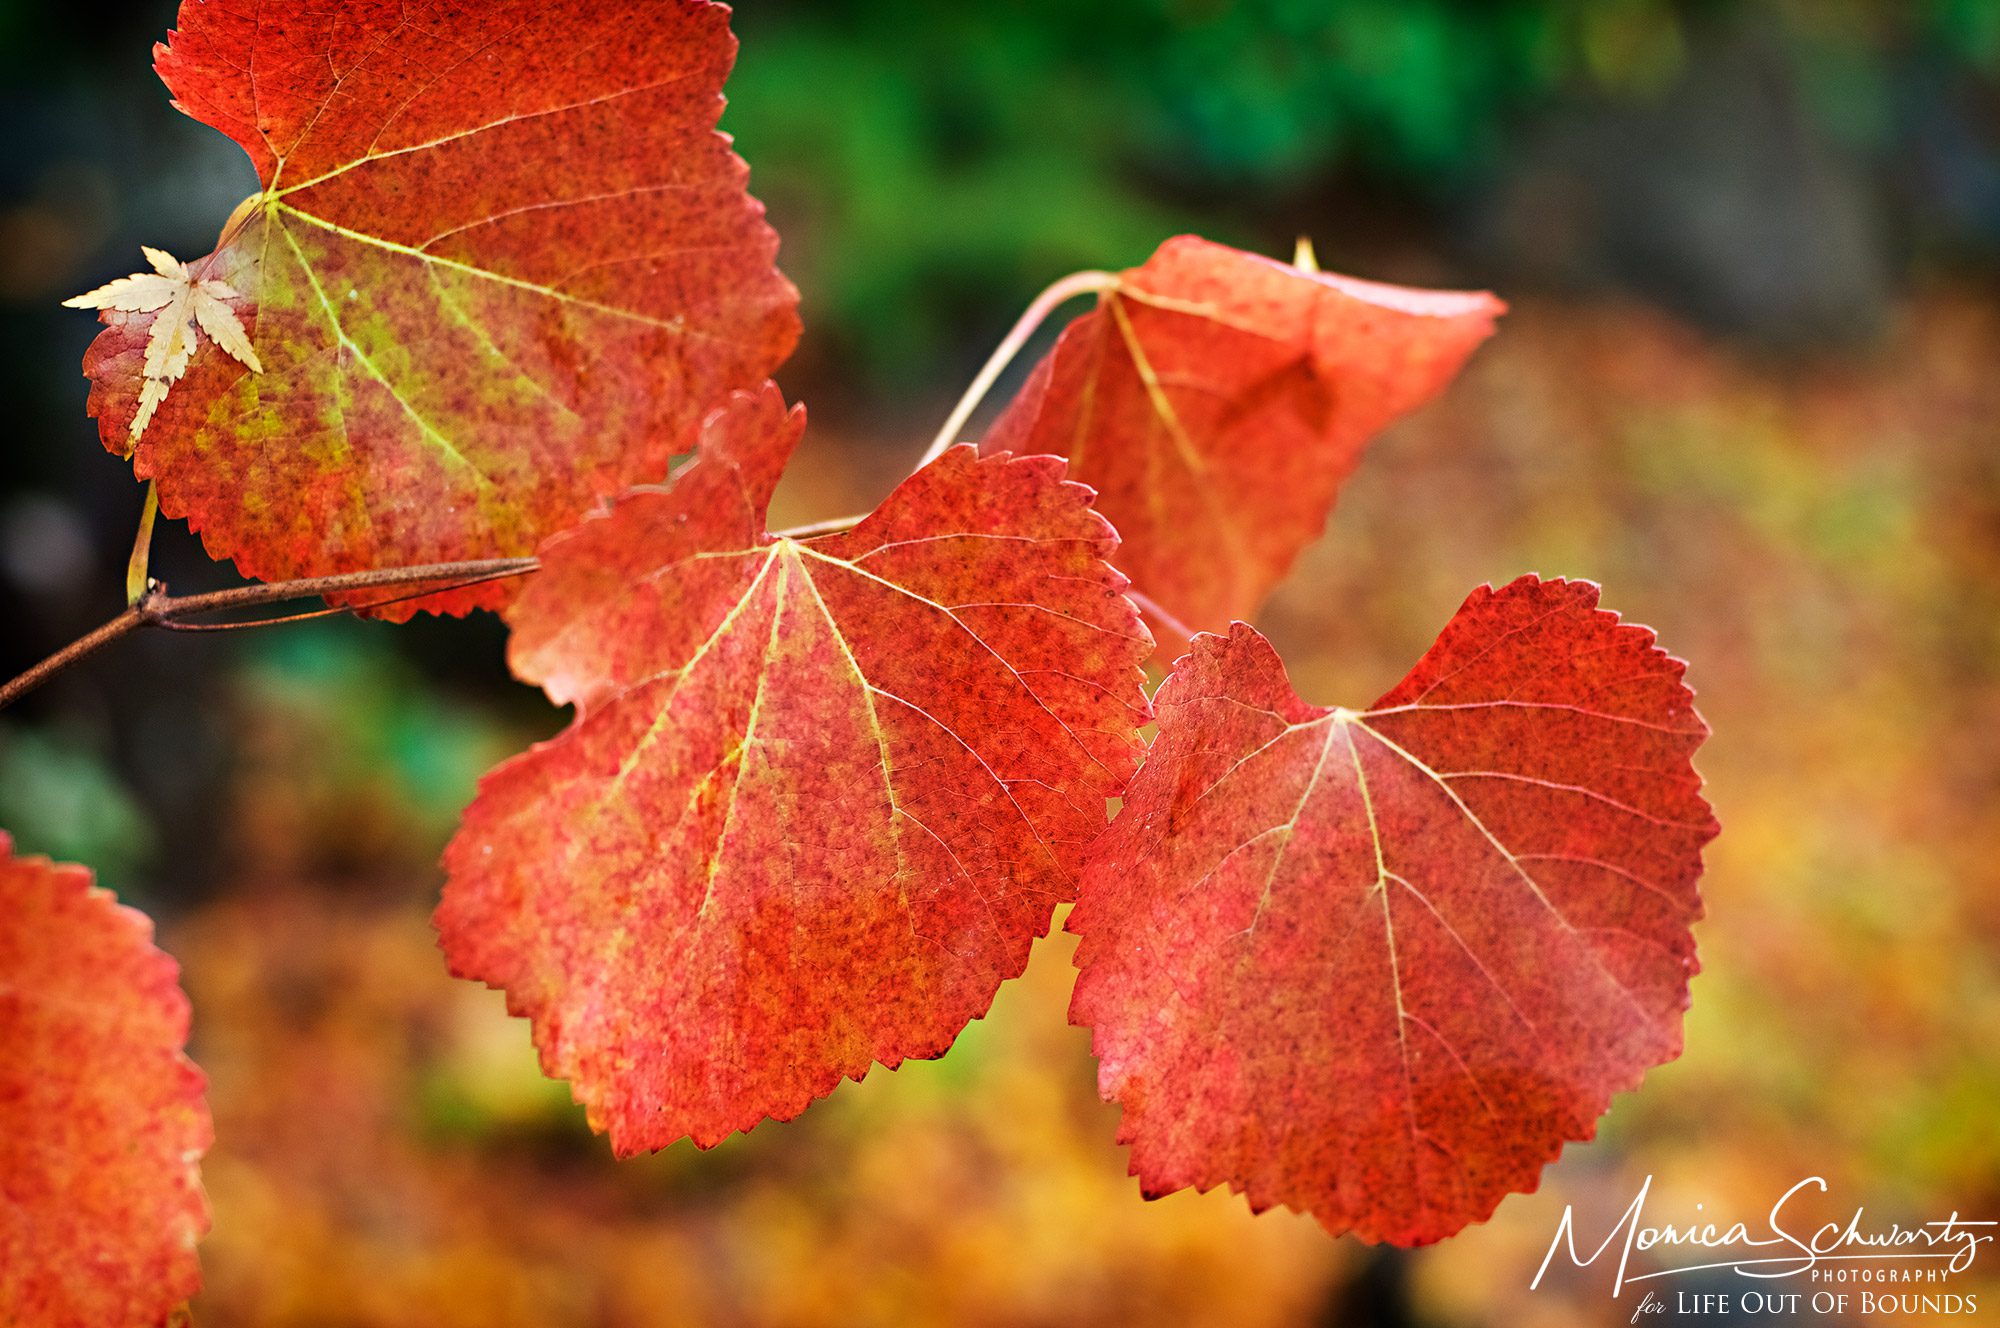 Fall-colors-on-plants-in-the-garden-on-a-rainy-autumn-day-Ross-California